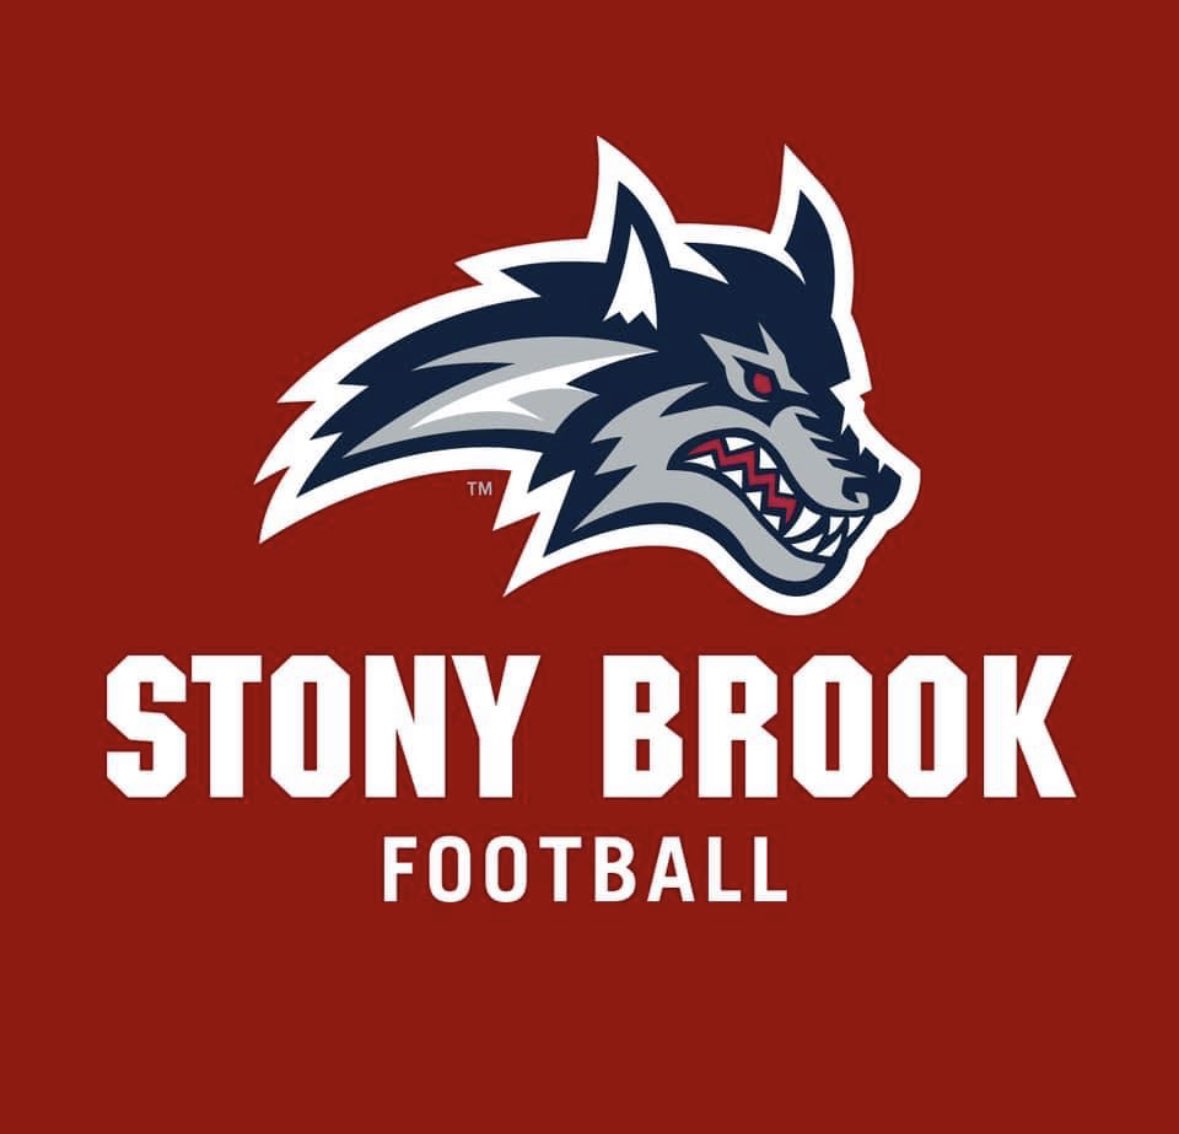 Thank you @FBCoachCollins for visiting today! Great to have you as a Longtime LI Coach and @StonyBrookFB recruiting LI and our players @HSWColtsFootbal #HOWL #hillswest #longislandfootball